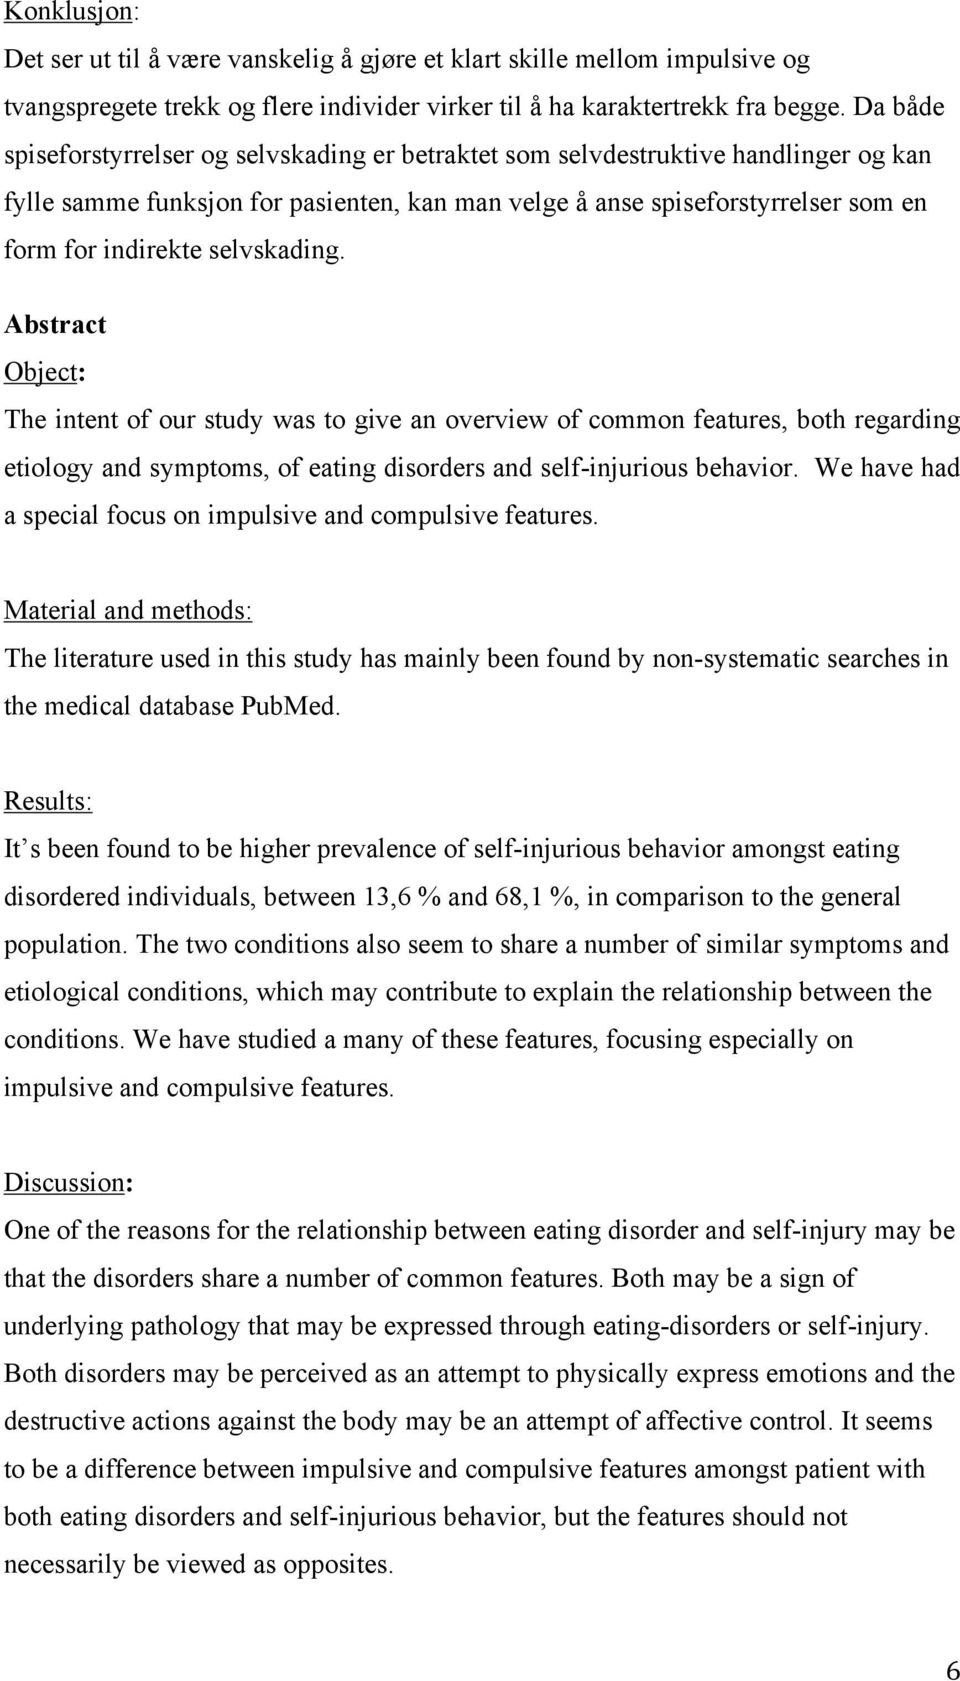 selvskading. Abstract Object: The intent of our study was to give an overview of common features, both regarding etiology and symptoms, of eating disorders and self-injurious behavior.